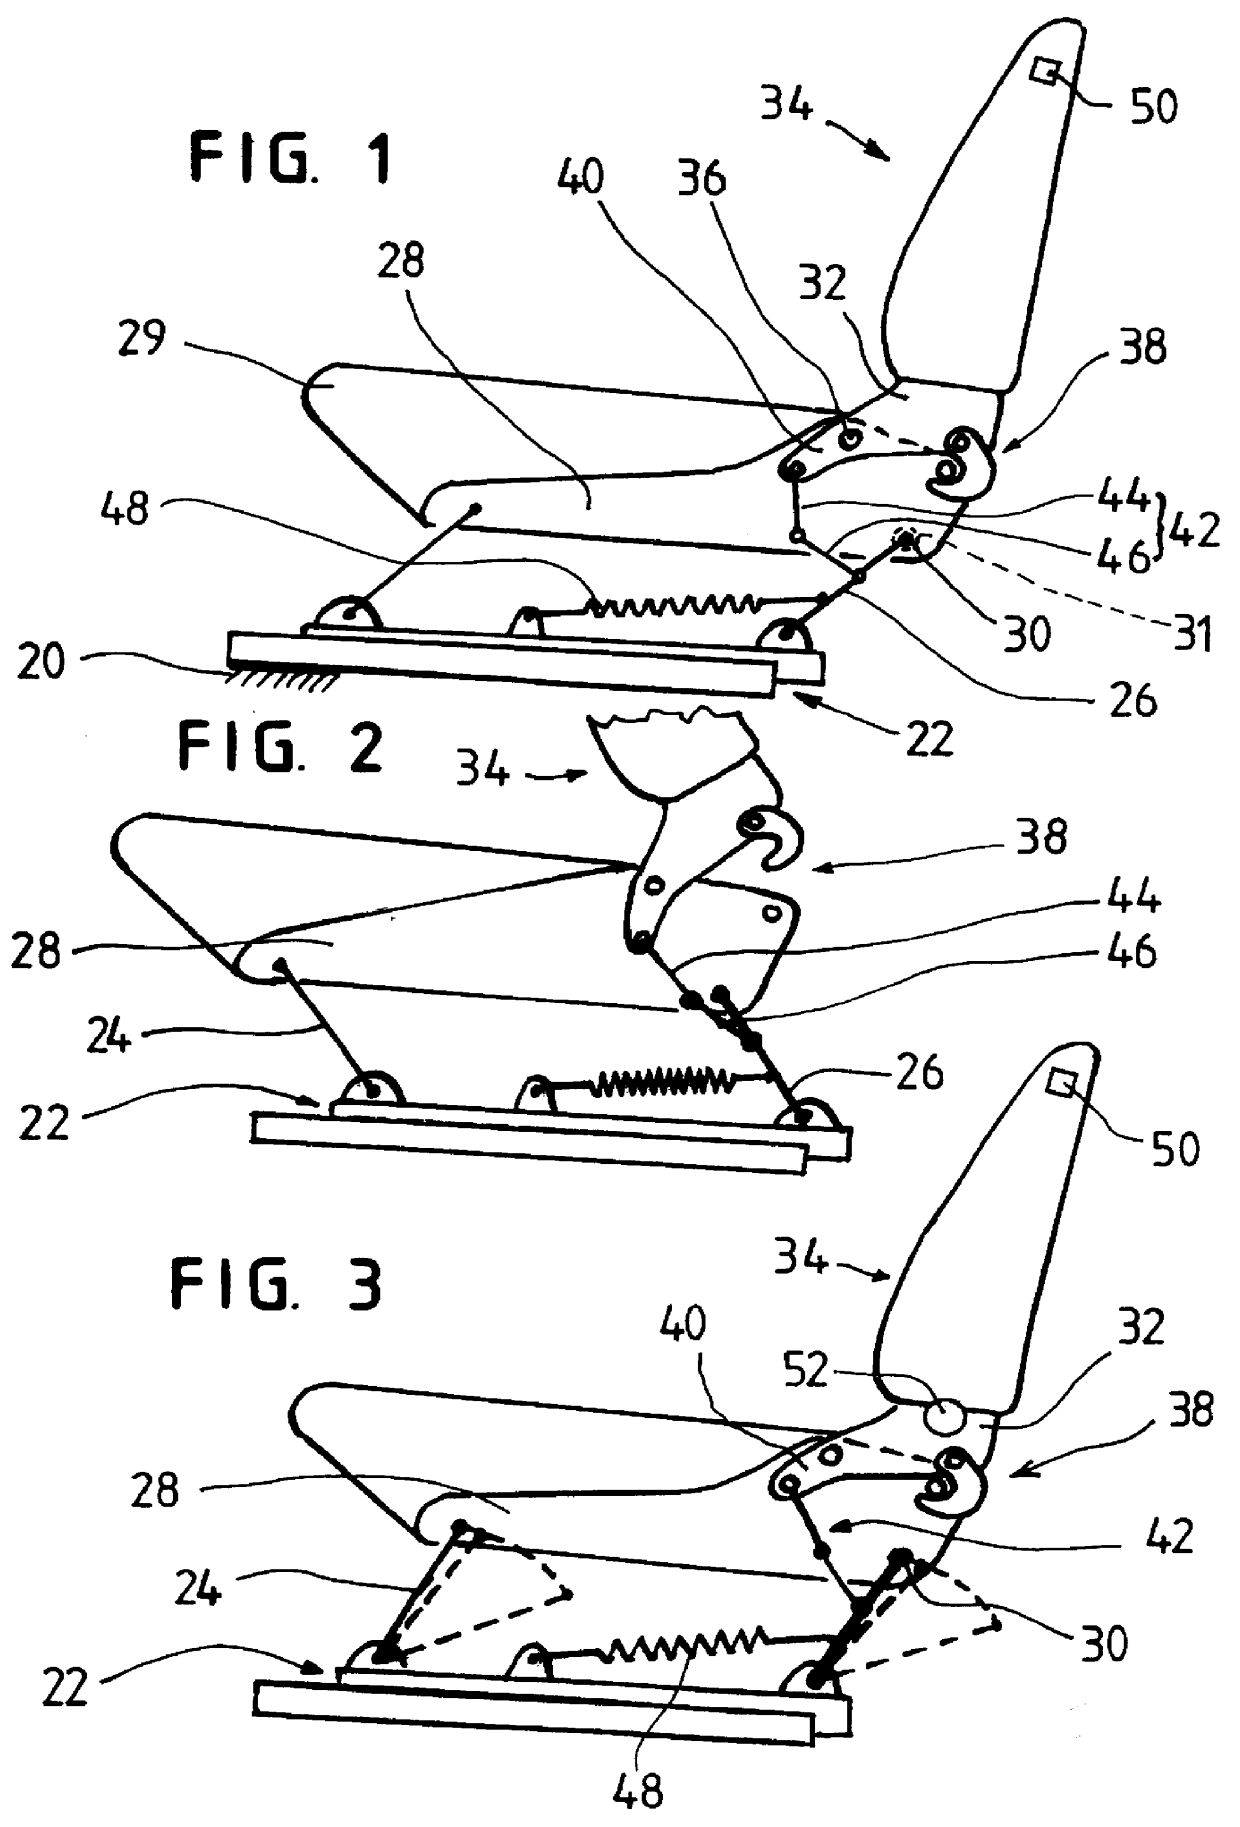 Motor vehicle seat with a back rest, which can be tilted forward and a seat carrier, which can be tilted forward